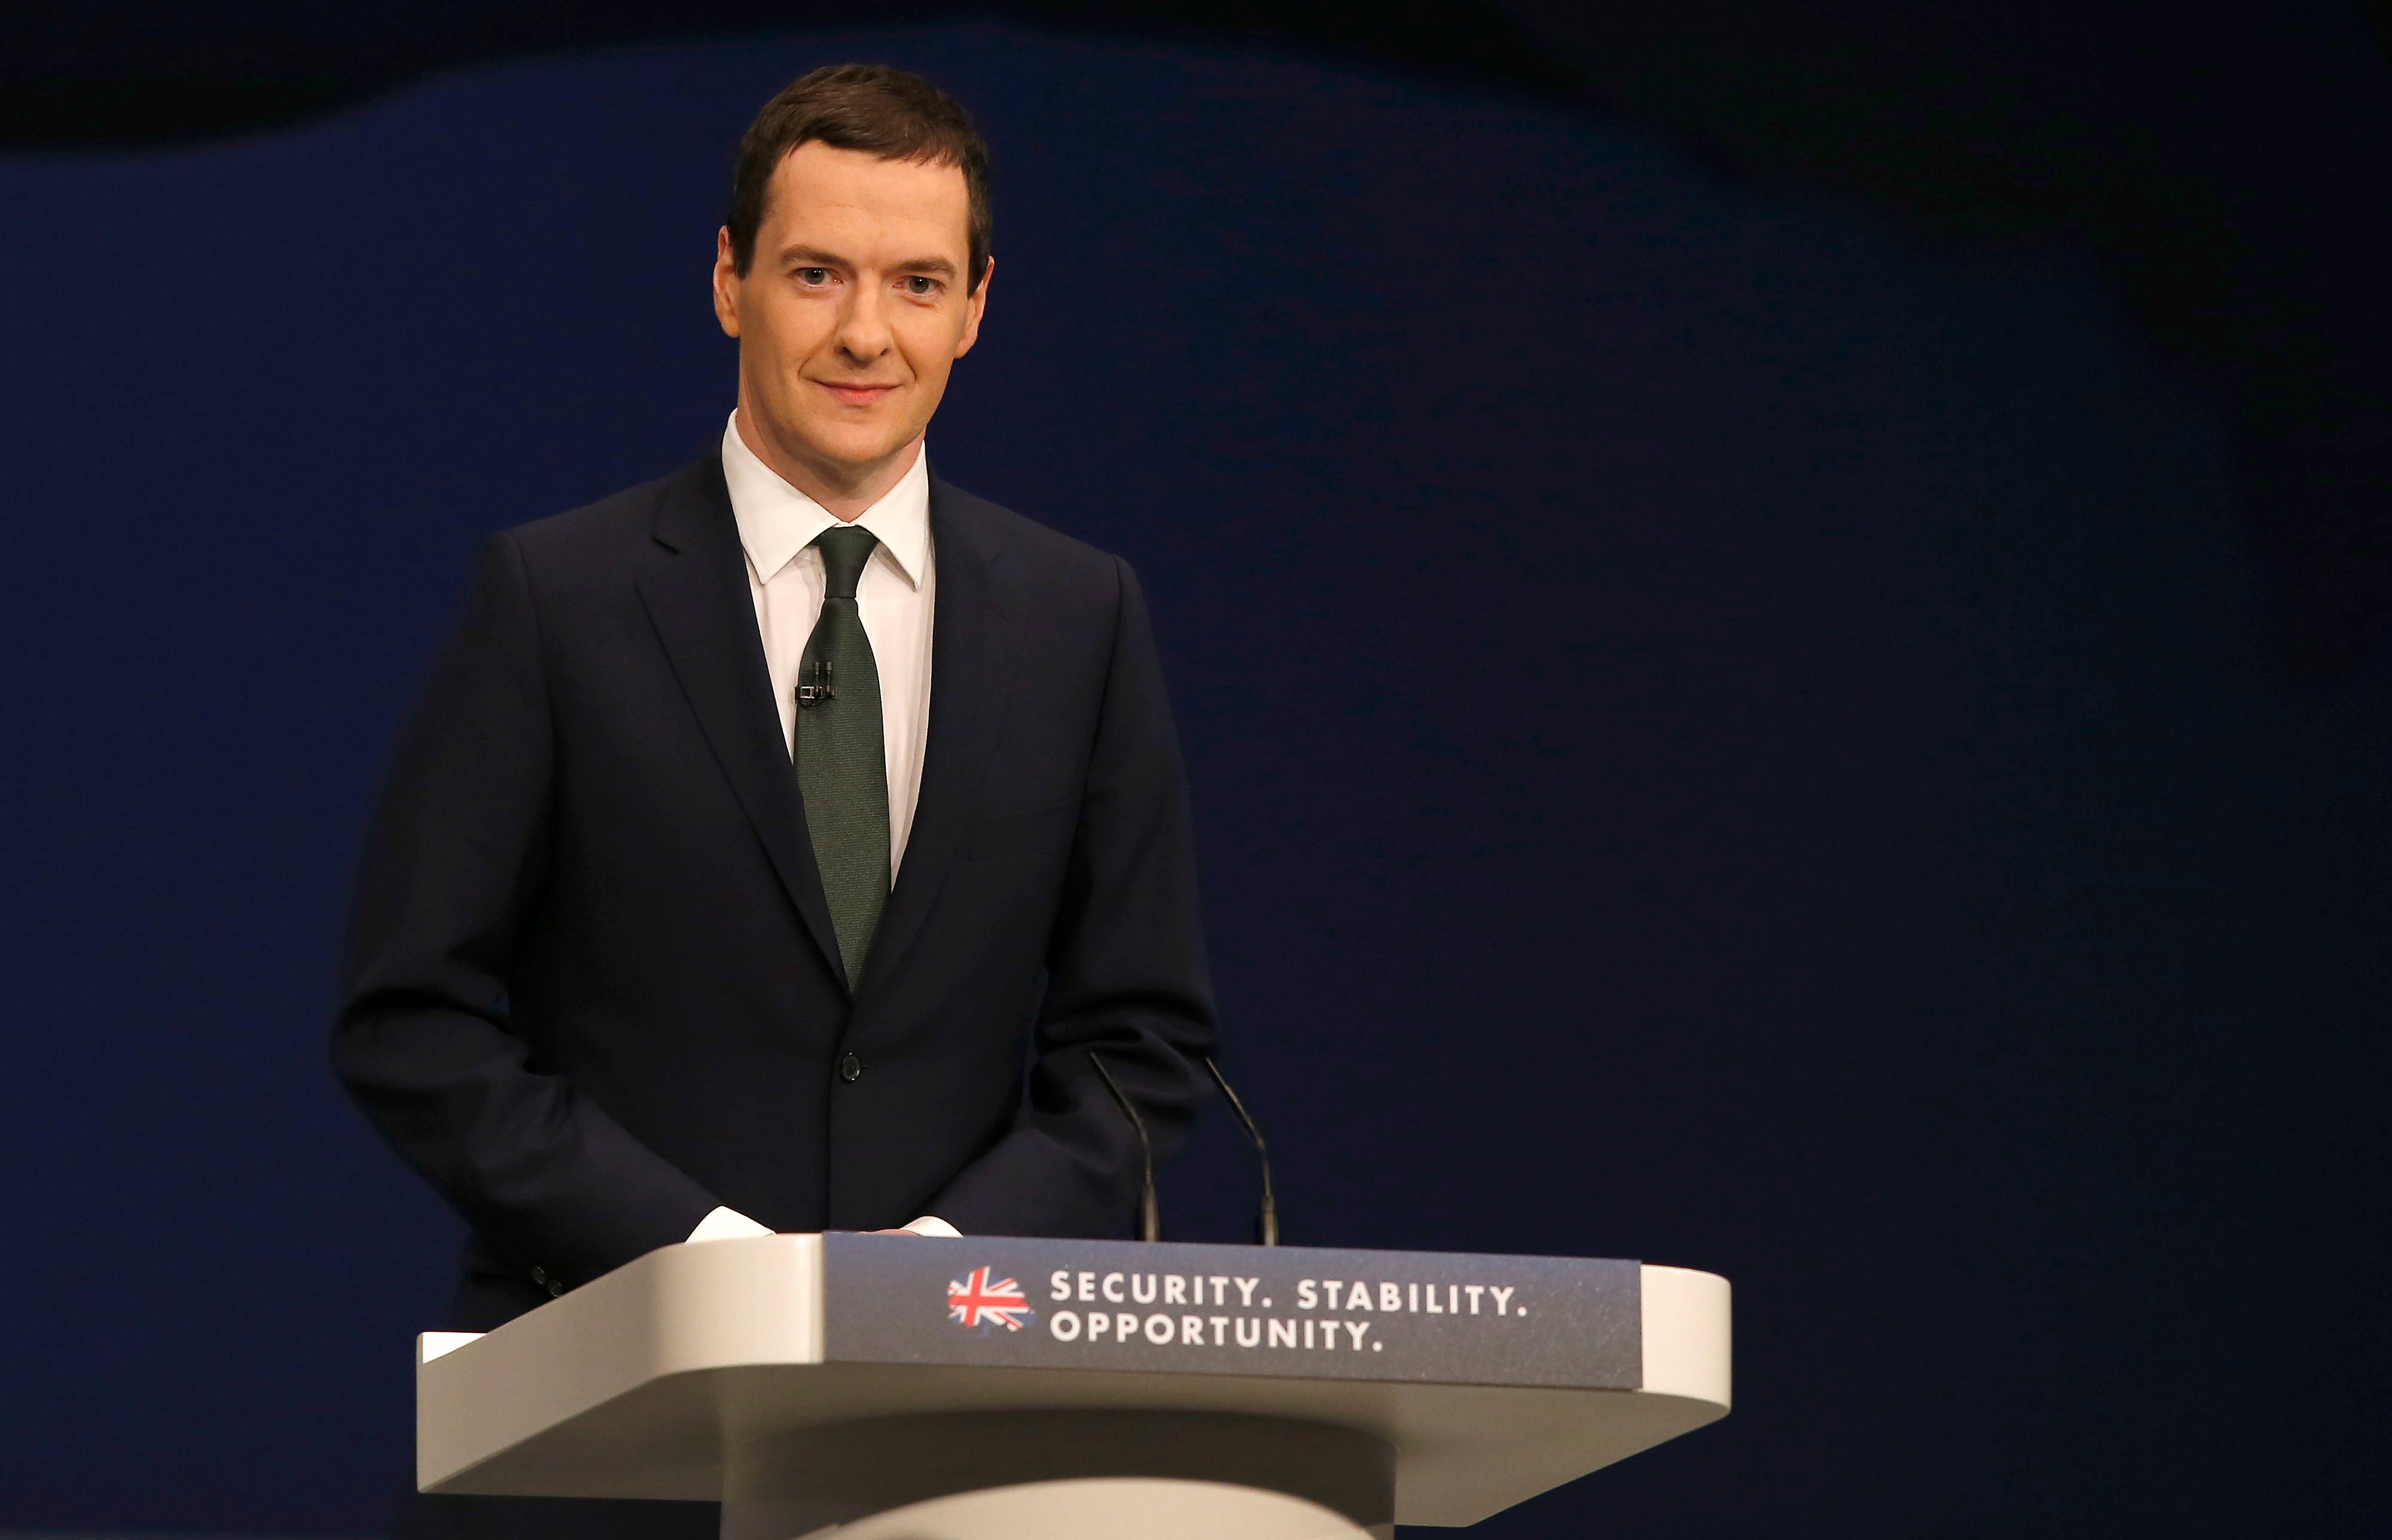 George Osborne makes his keynote speech to the Conservative party conference